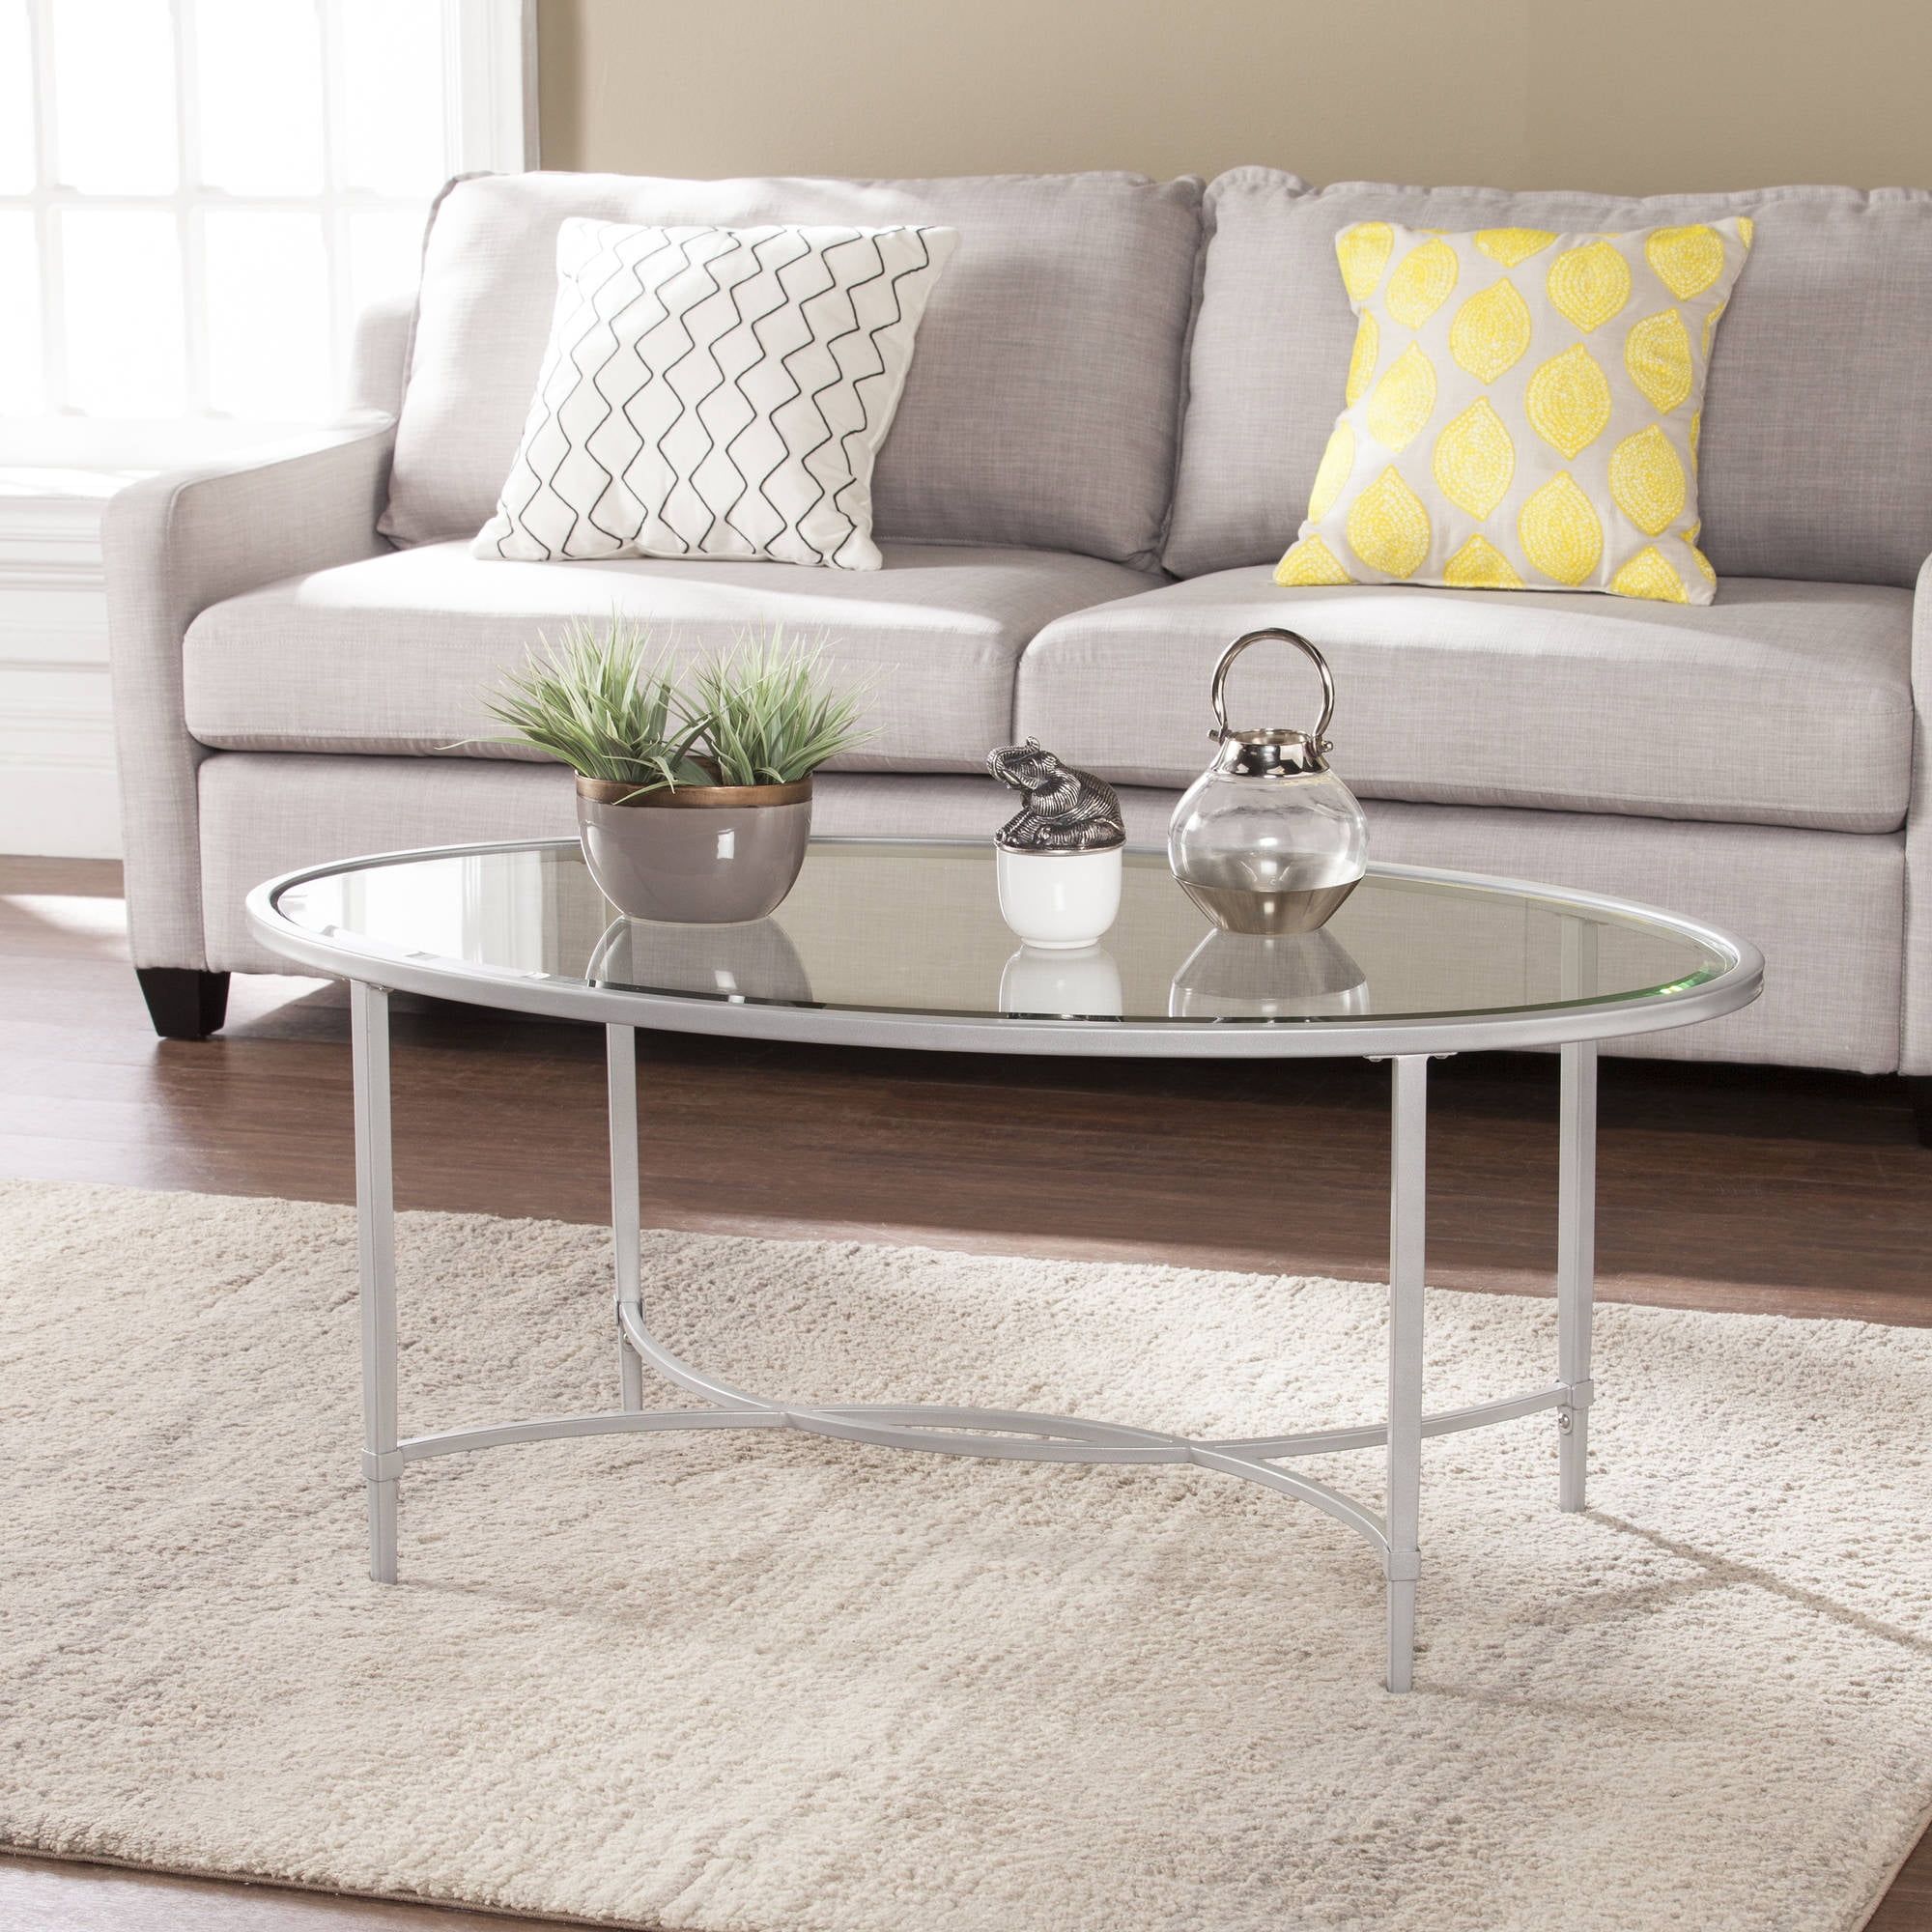 Quibilah Metal/glass Oval Coffee Table, Silver – Walmart Inside Oval Glass Coffee Tables (View 6 of 20)